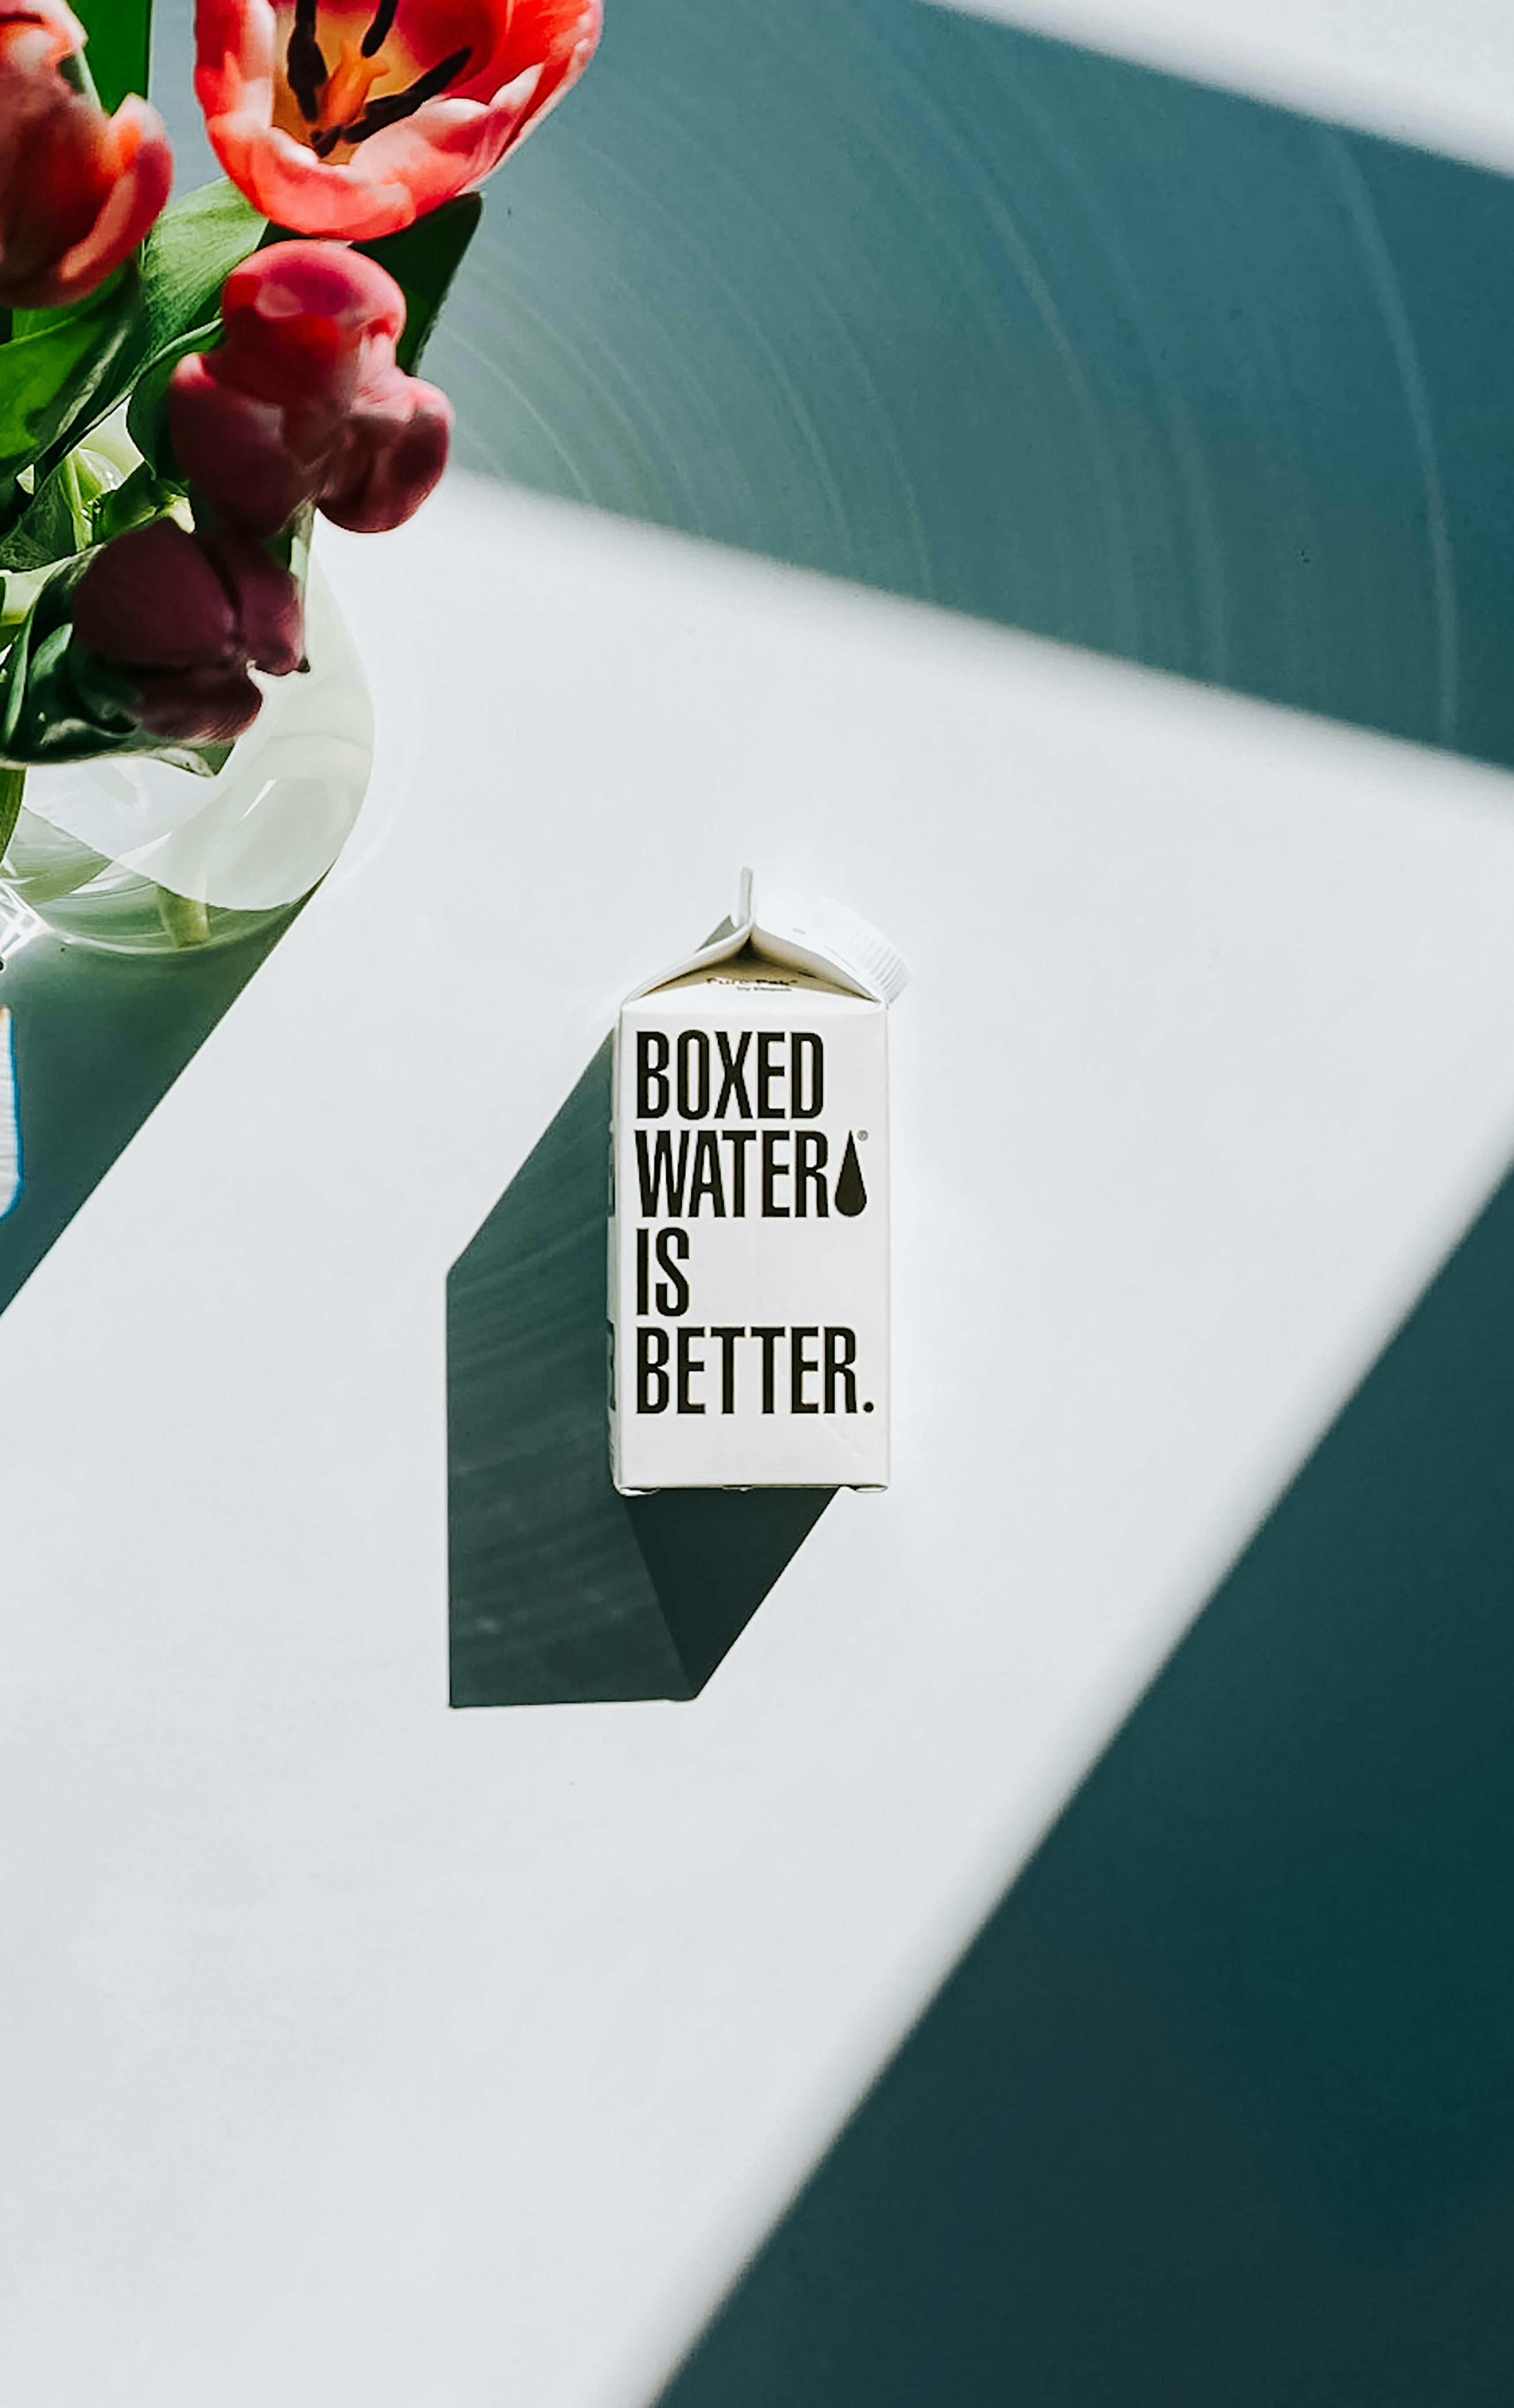 /products/5/boxed-water-is-better-LKRBckl4jSI-unsplash.jpg